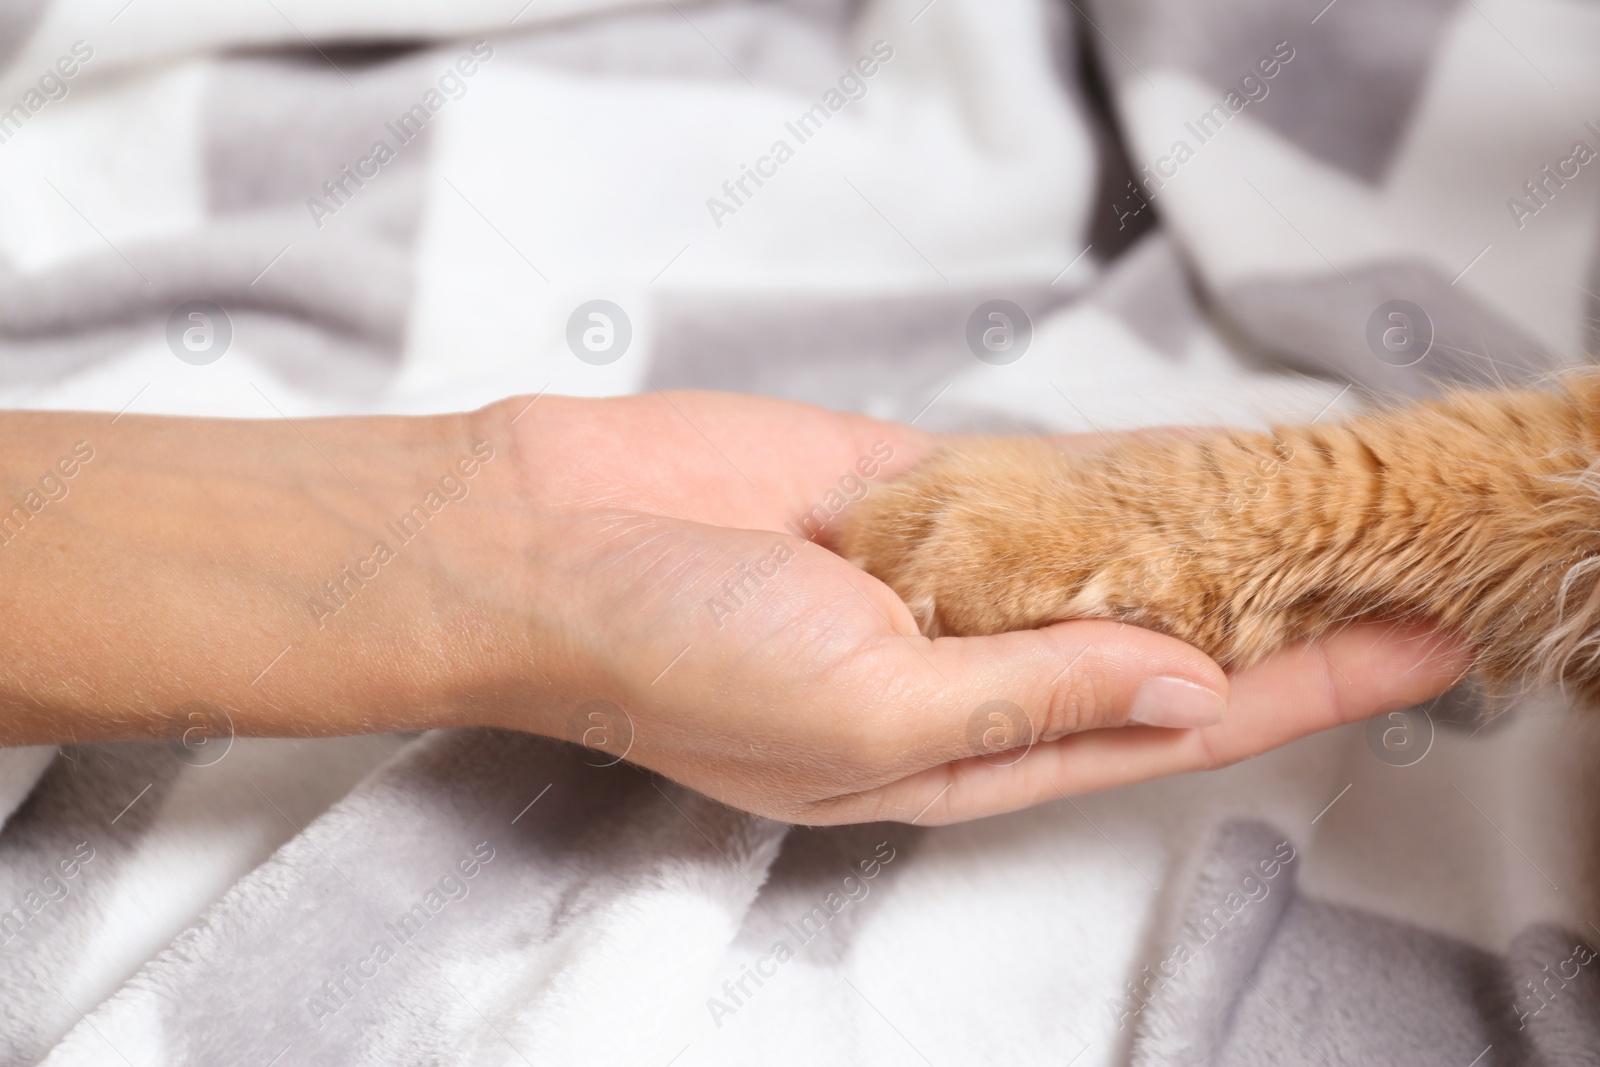 Photo of Woman and cat holding hands together on warm blanket, closeup view